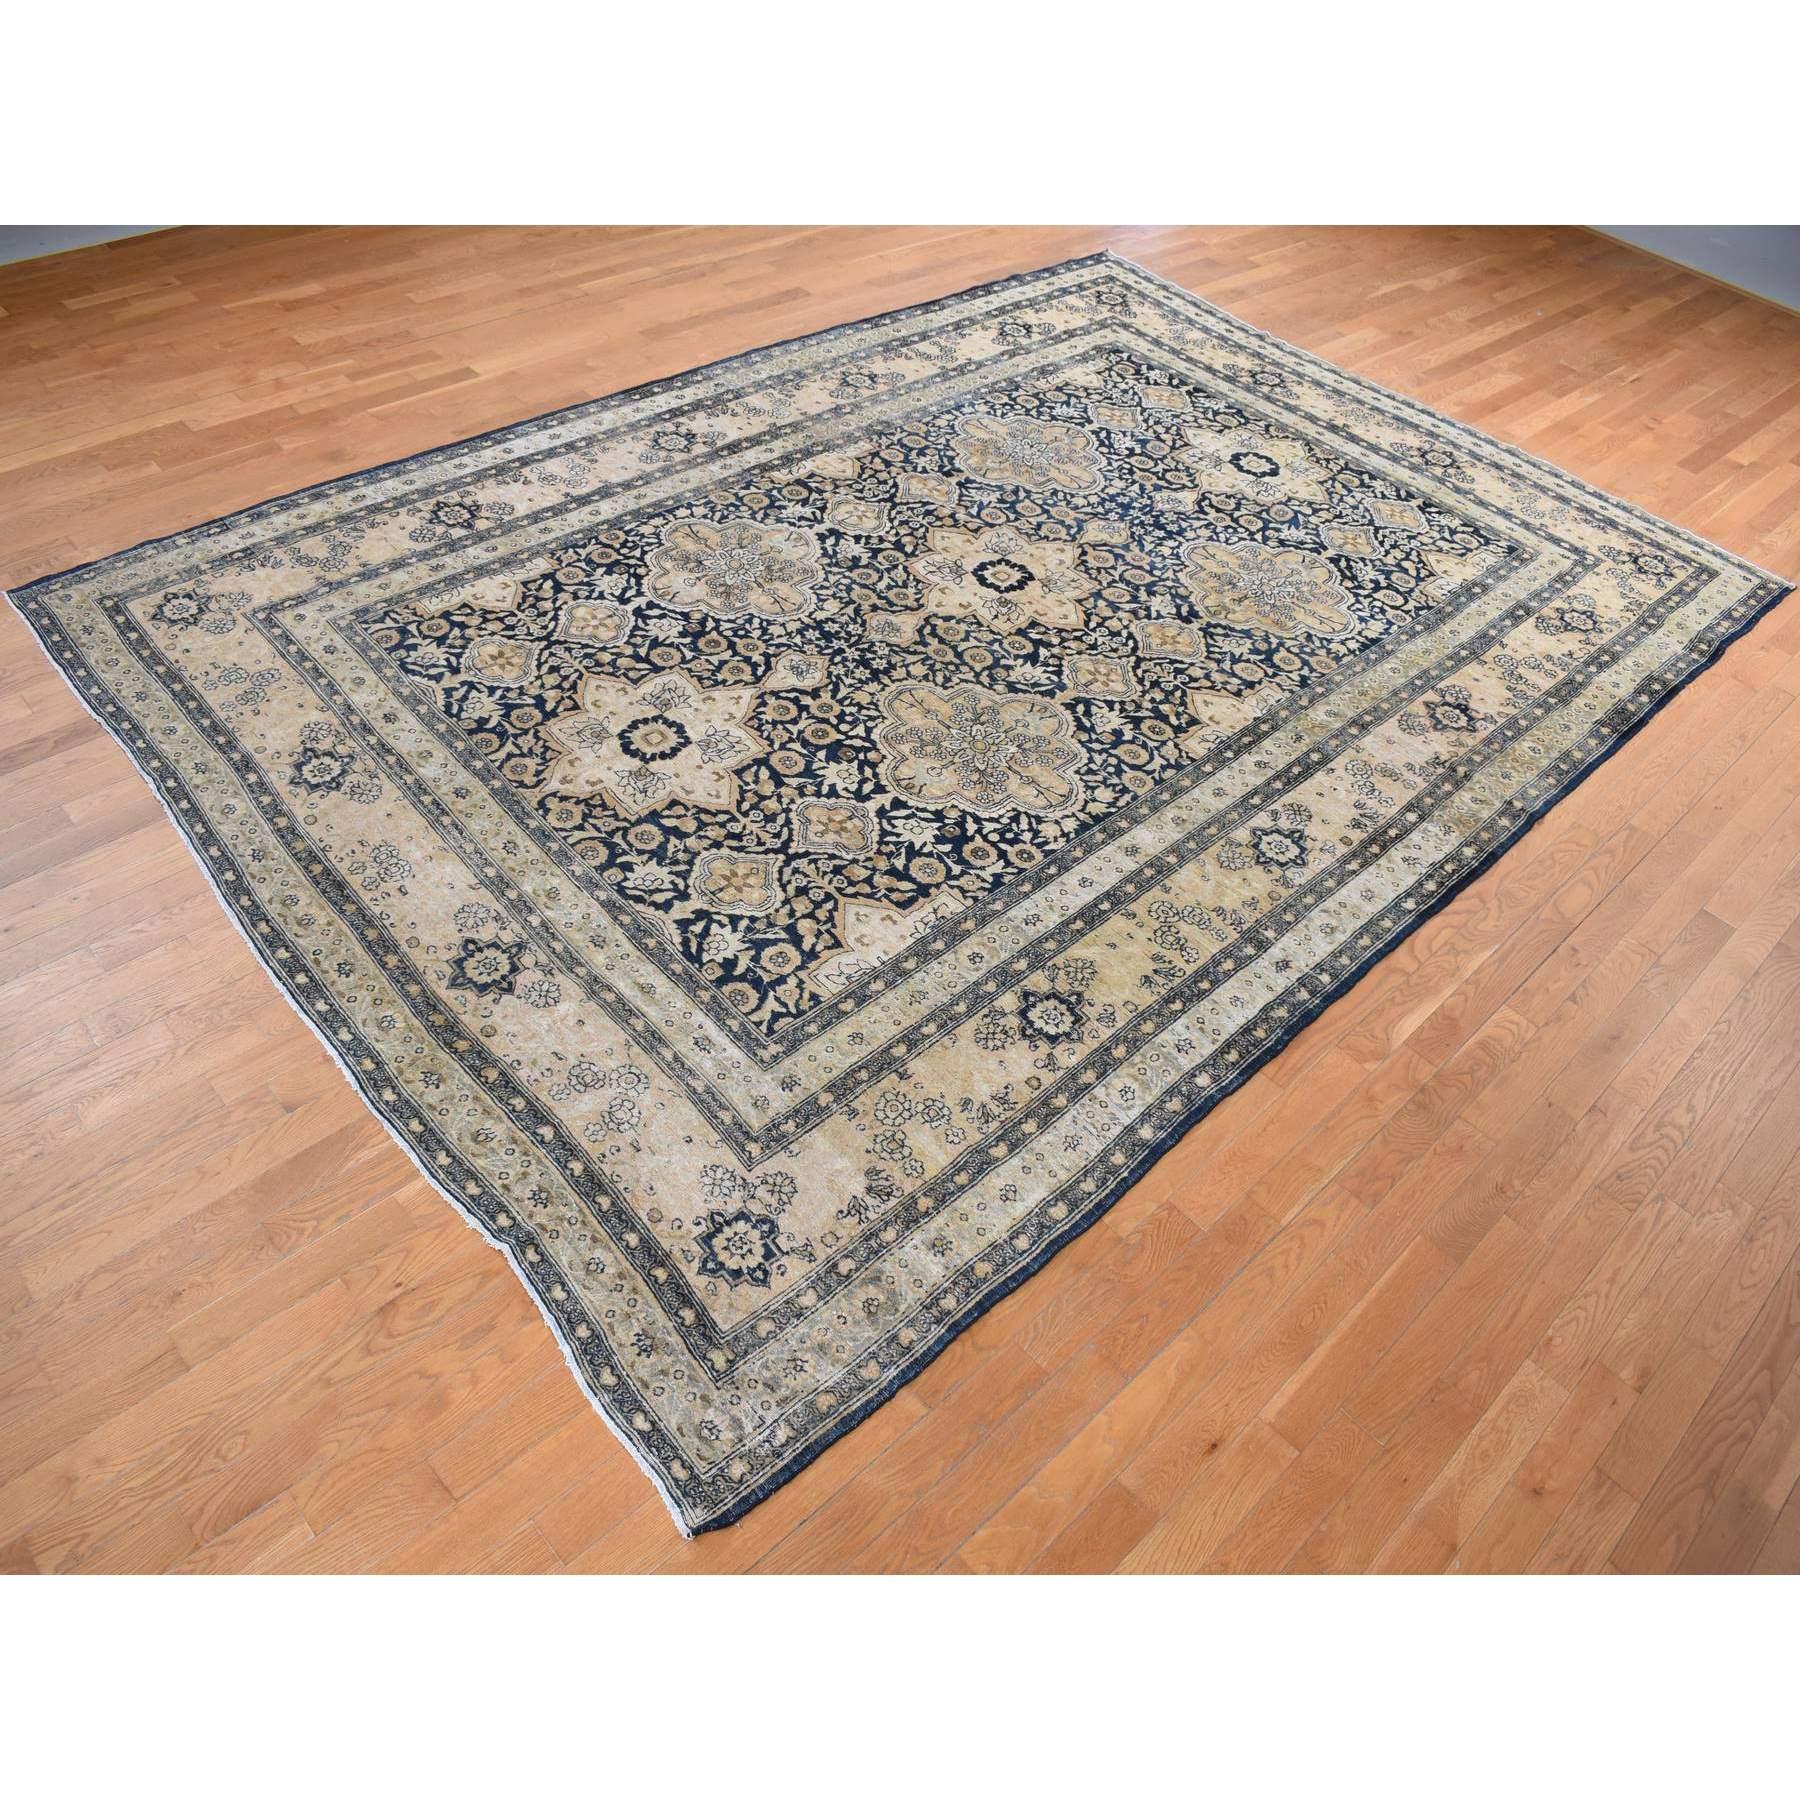 Medieval Midnight Blue Antique Persian Tabriz Even Wear Clean Soft Wool Hand Knotted Rug For Sale